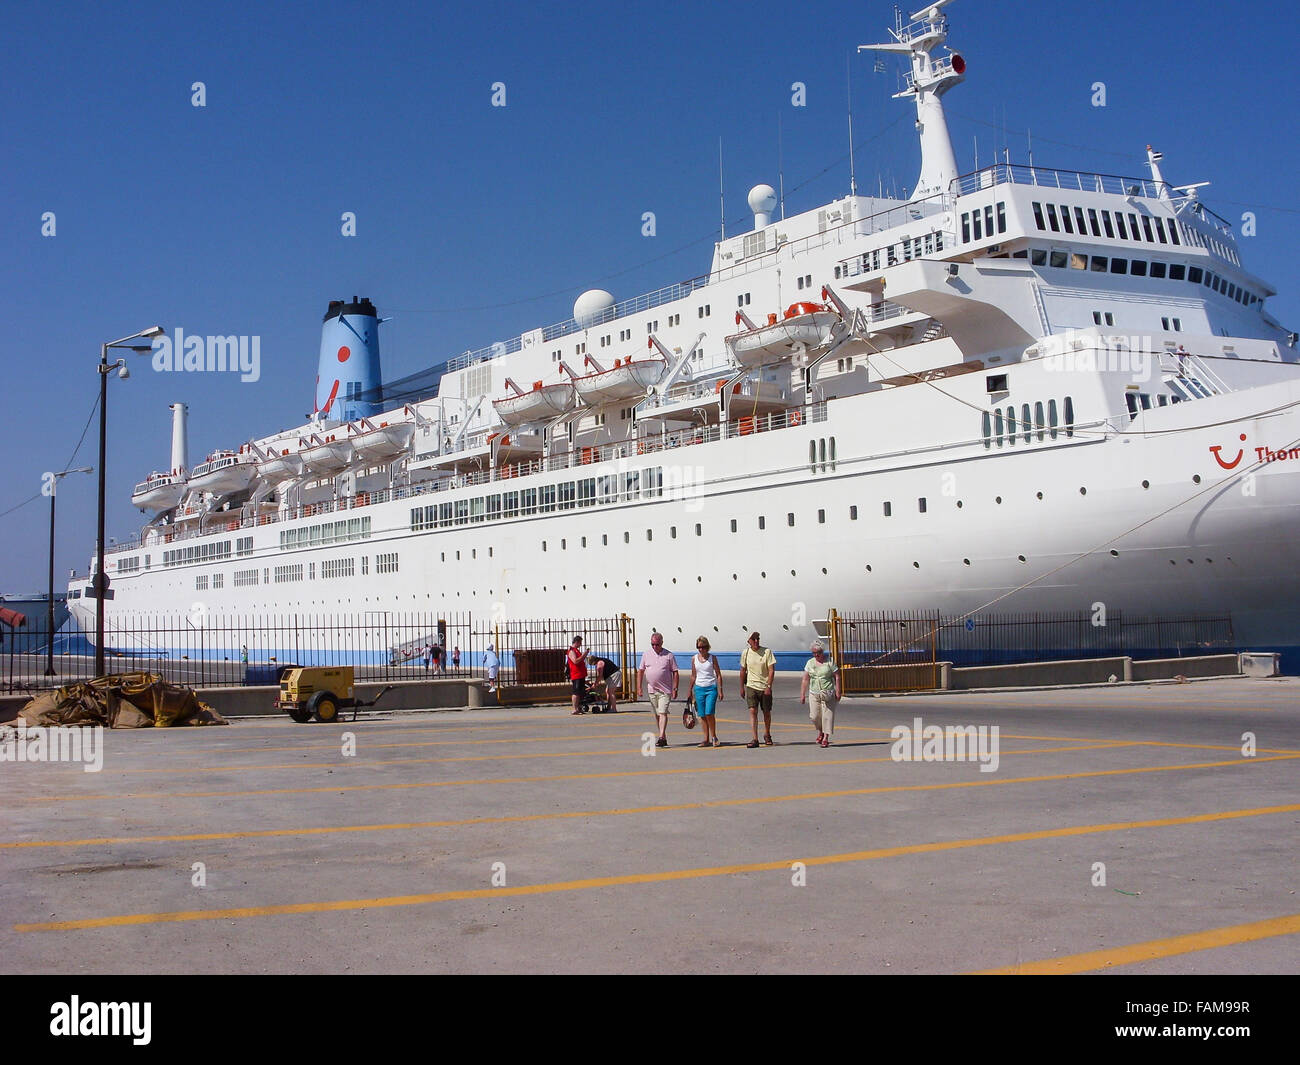 Thomson celebration cruise ship docked at Old Rhodes Town Greece Stock Photo